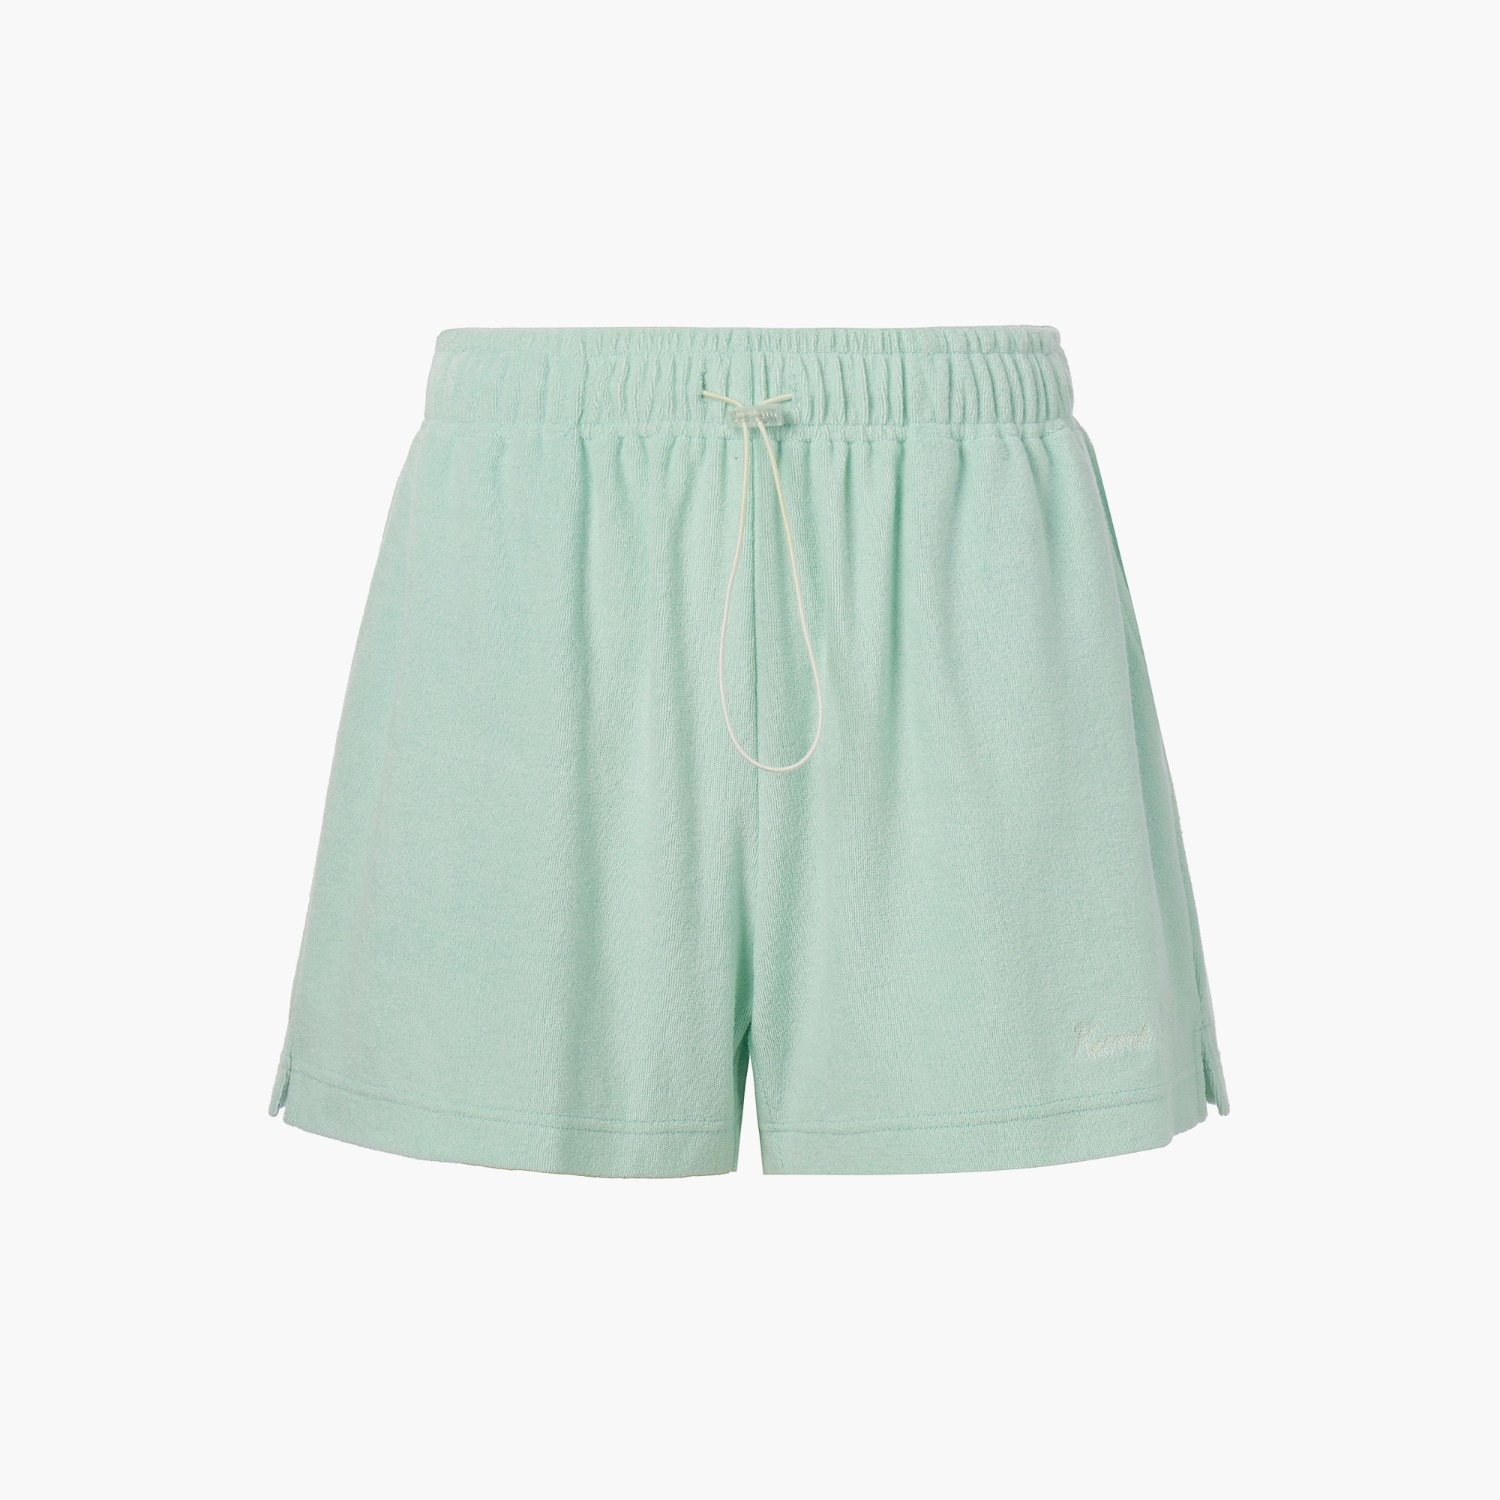 SURF EMBROIDERED TERRY SHORTS, MINT